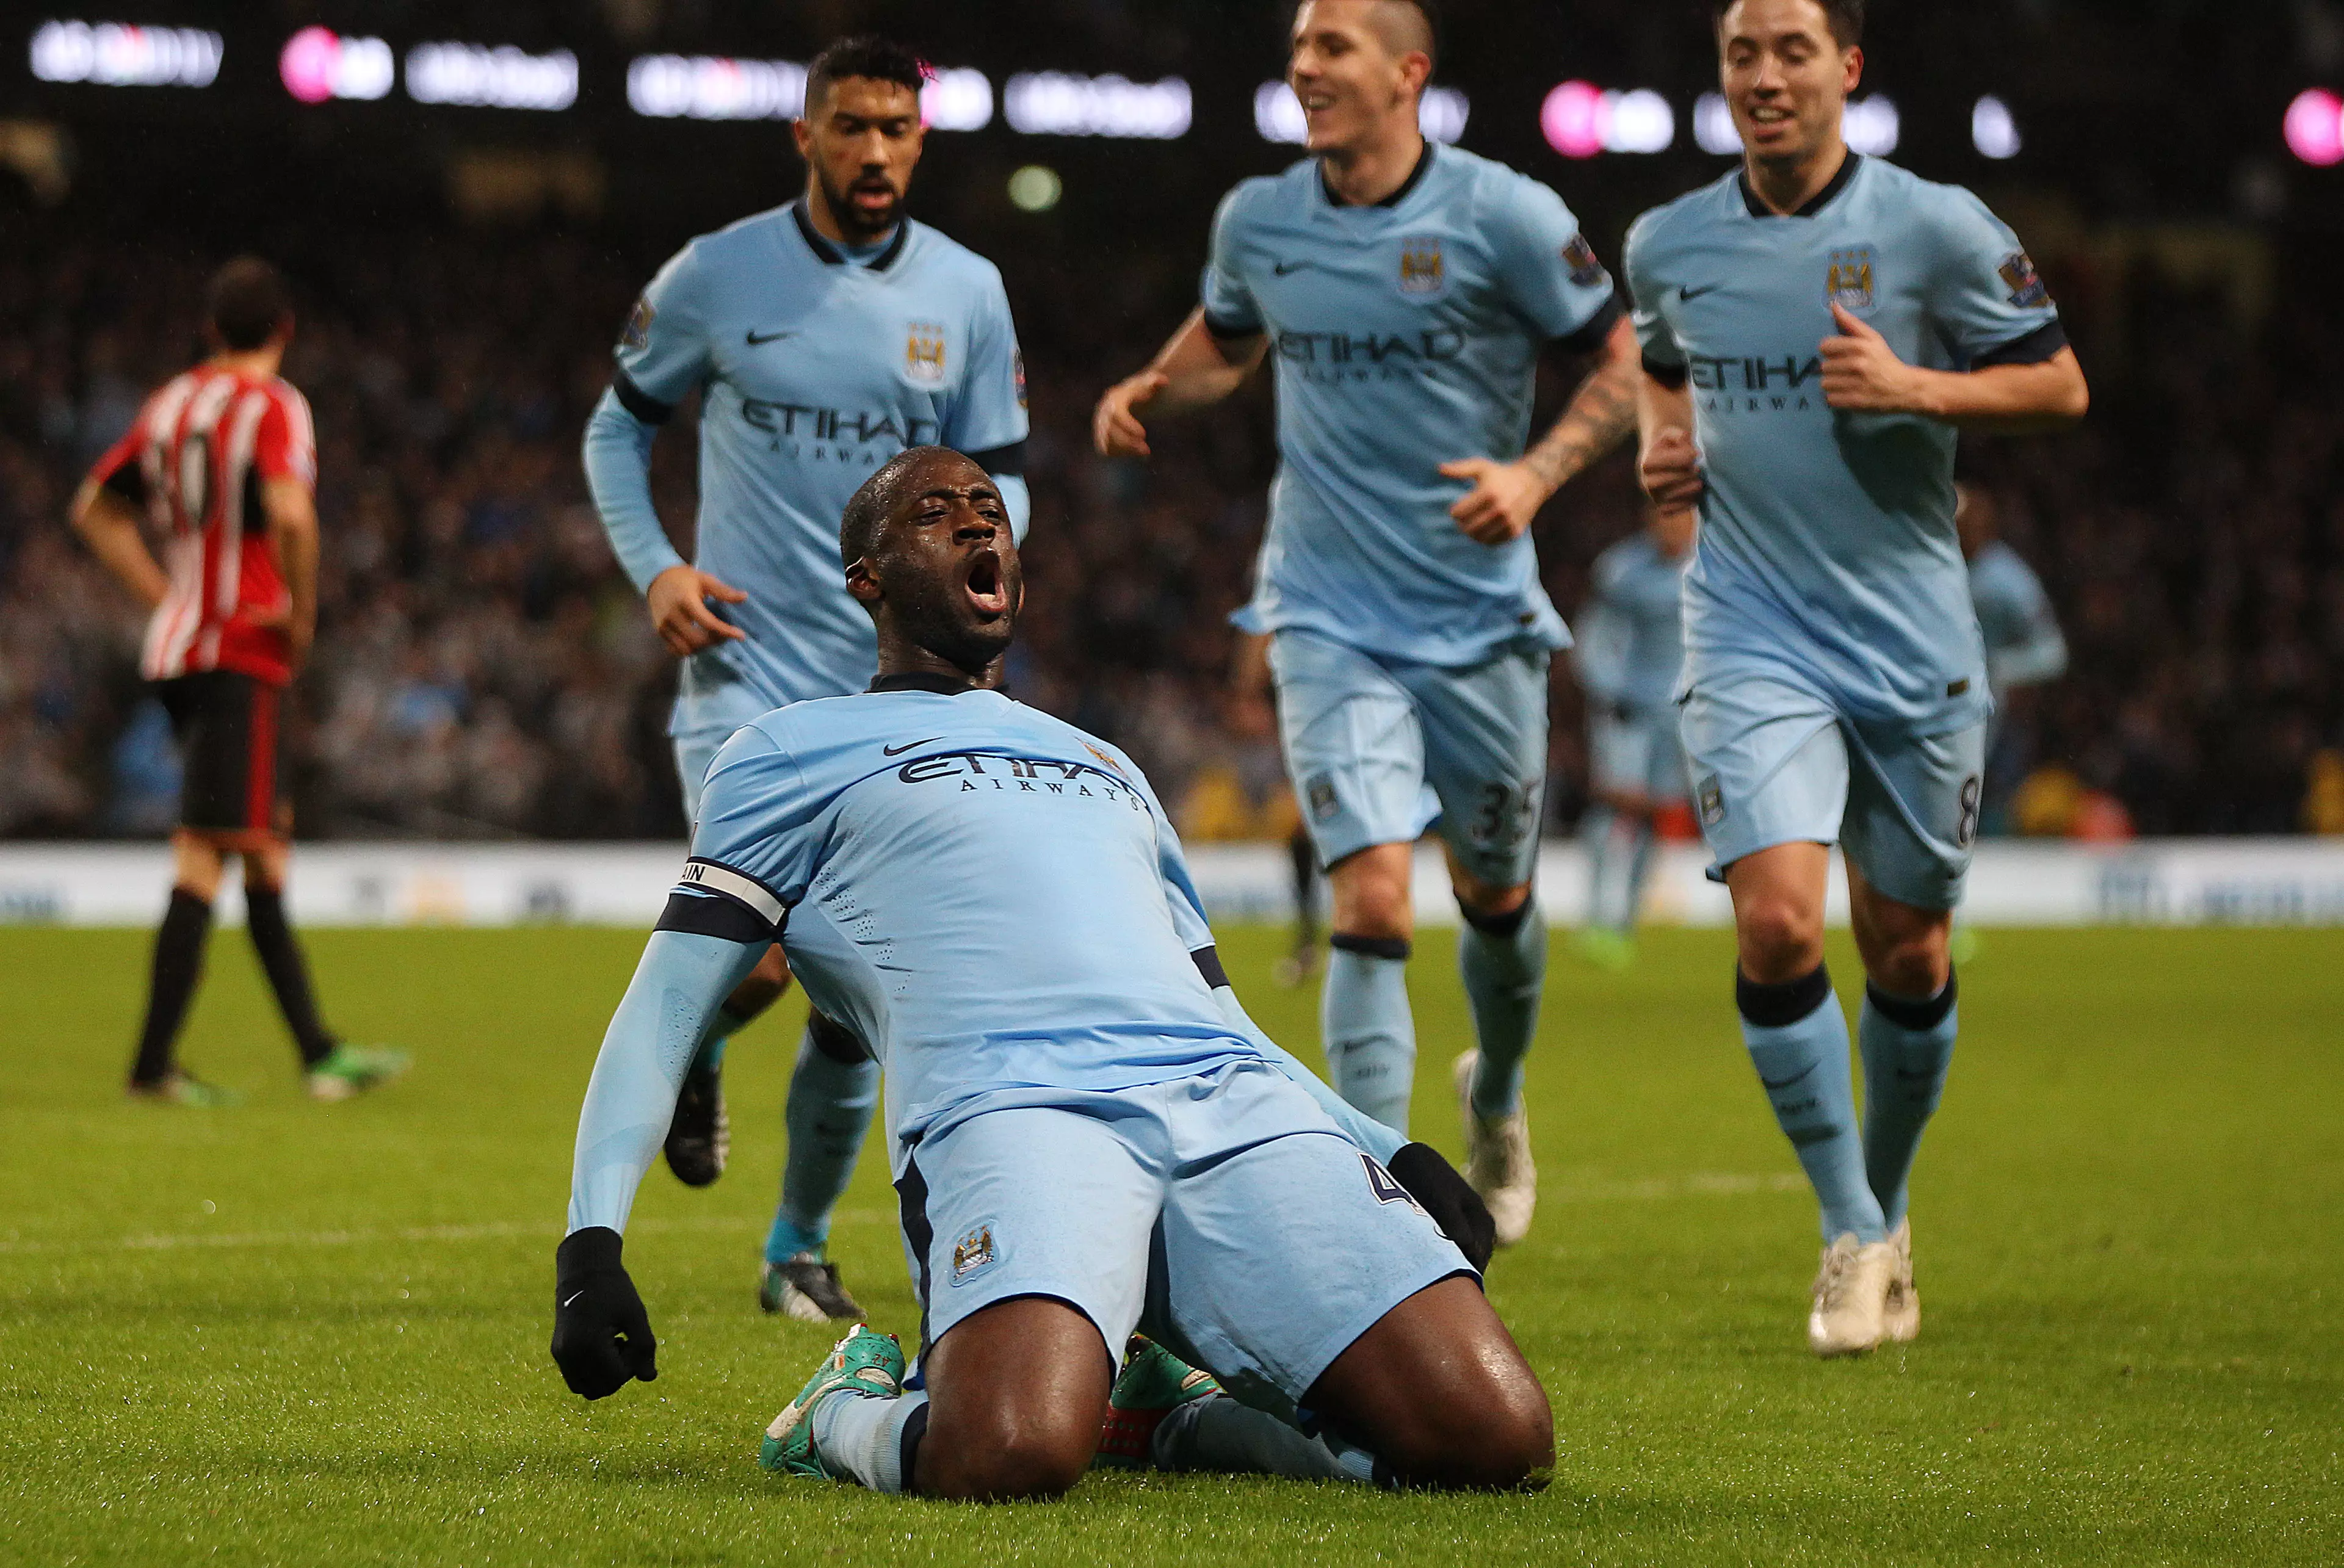 Toure was unstoppable at times for City. Image: PA Images